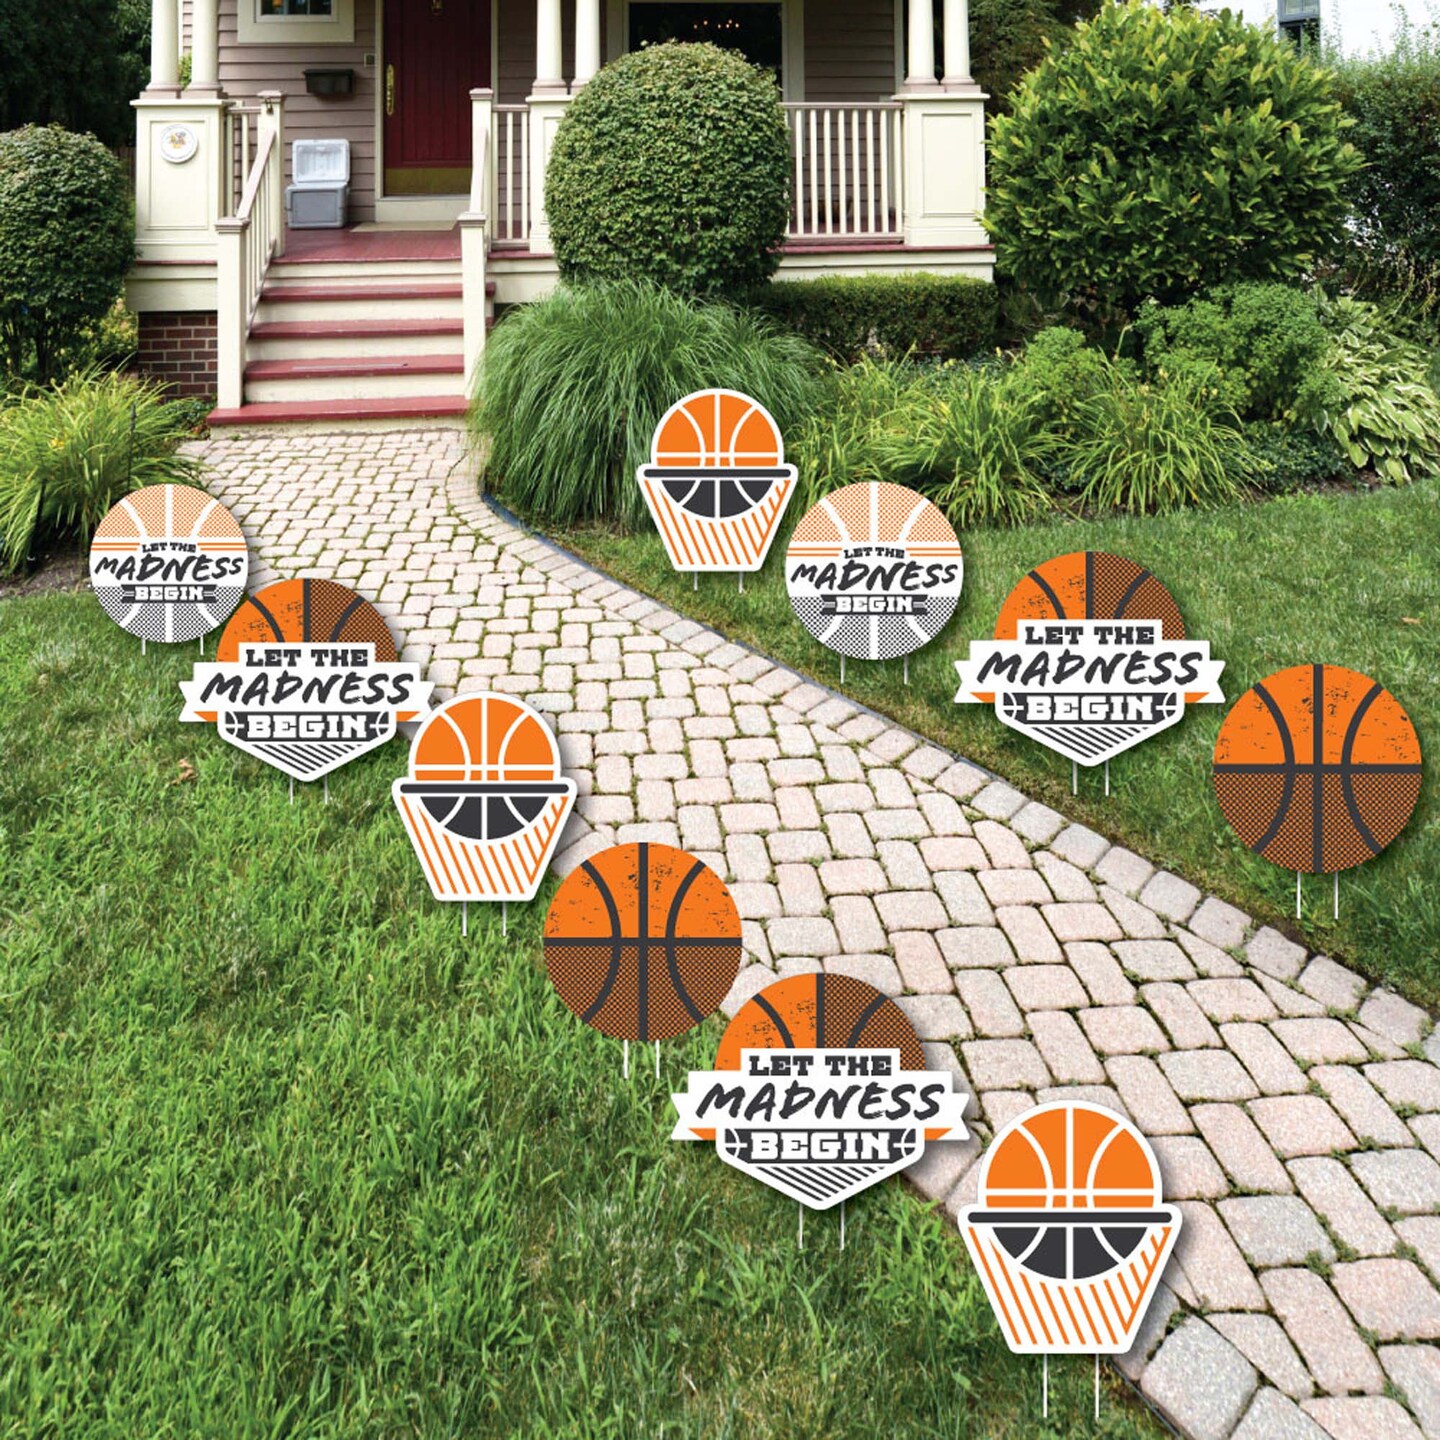 Big Dot of Happiness Basketball - Let The Madness Begin - Lawn Decorations - Outdoor College Basketball Party Yard Decorations - 10 Piece